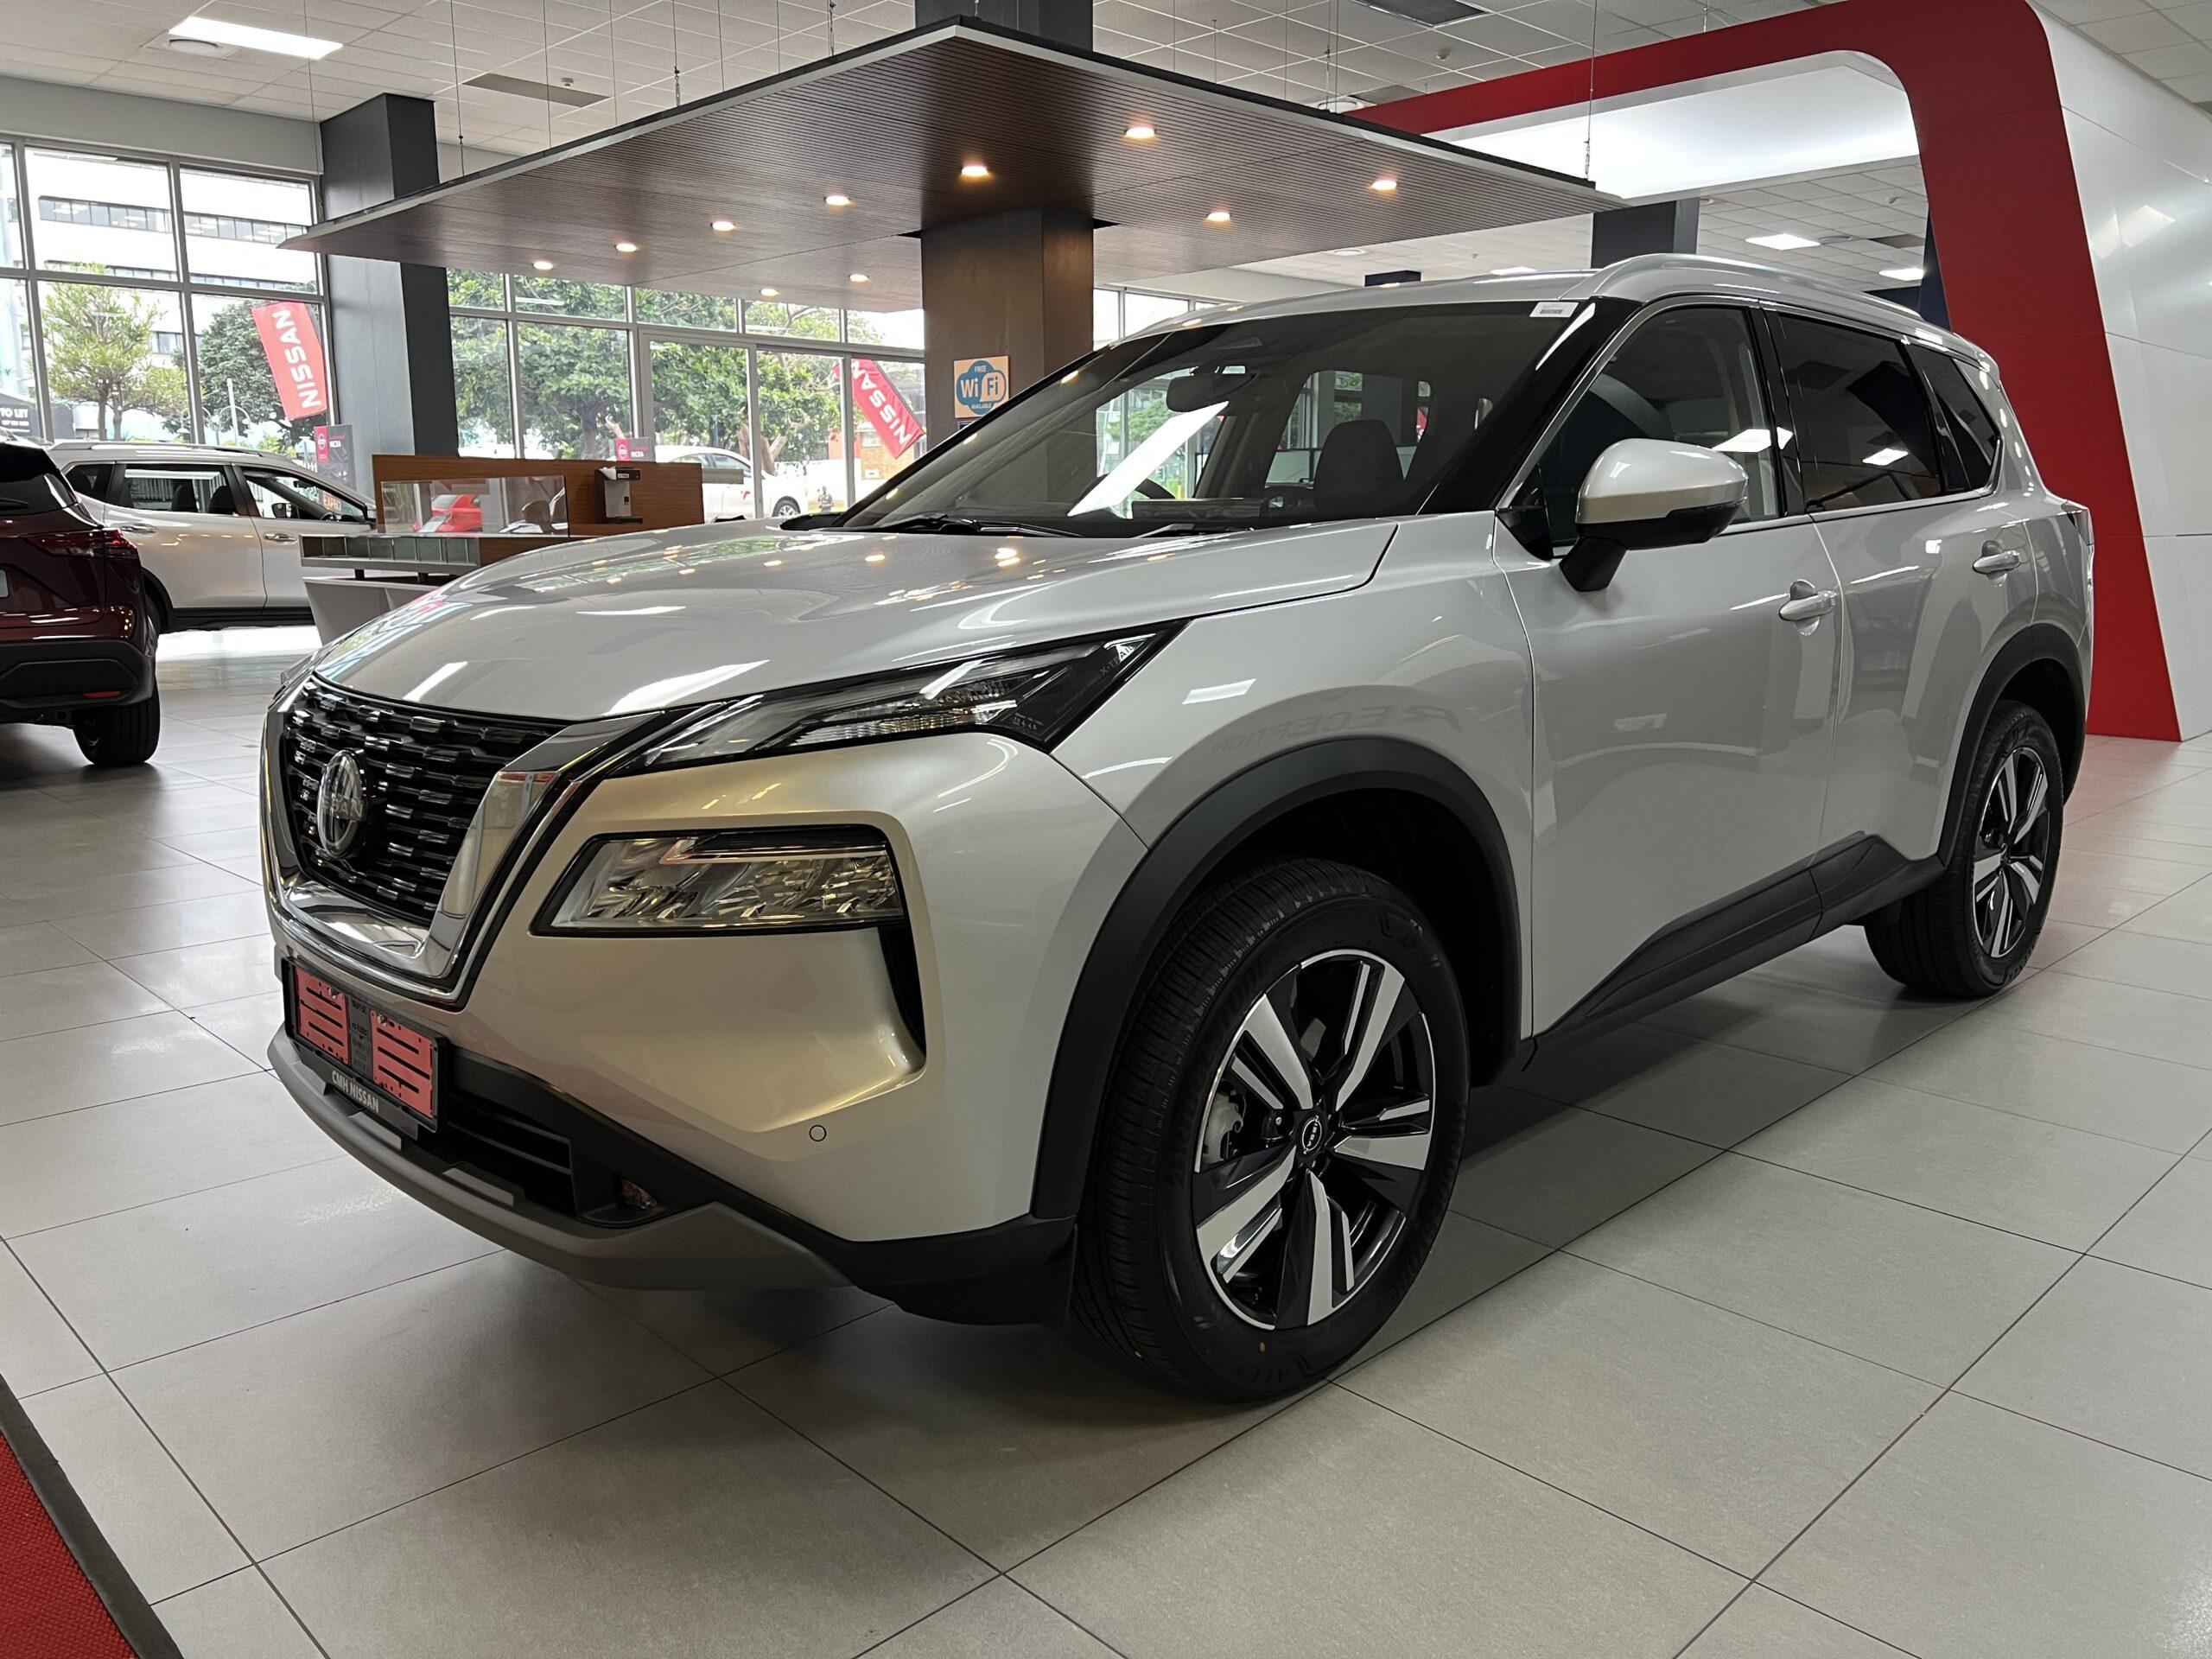 CMH nissan blog - Unleashing Adventure with the All-New Nissan X-Trail at CMH Nissan